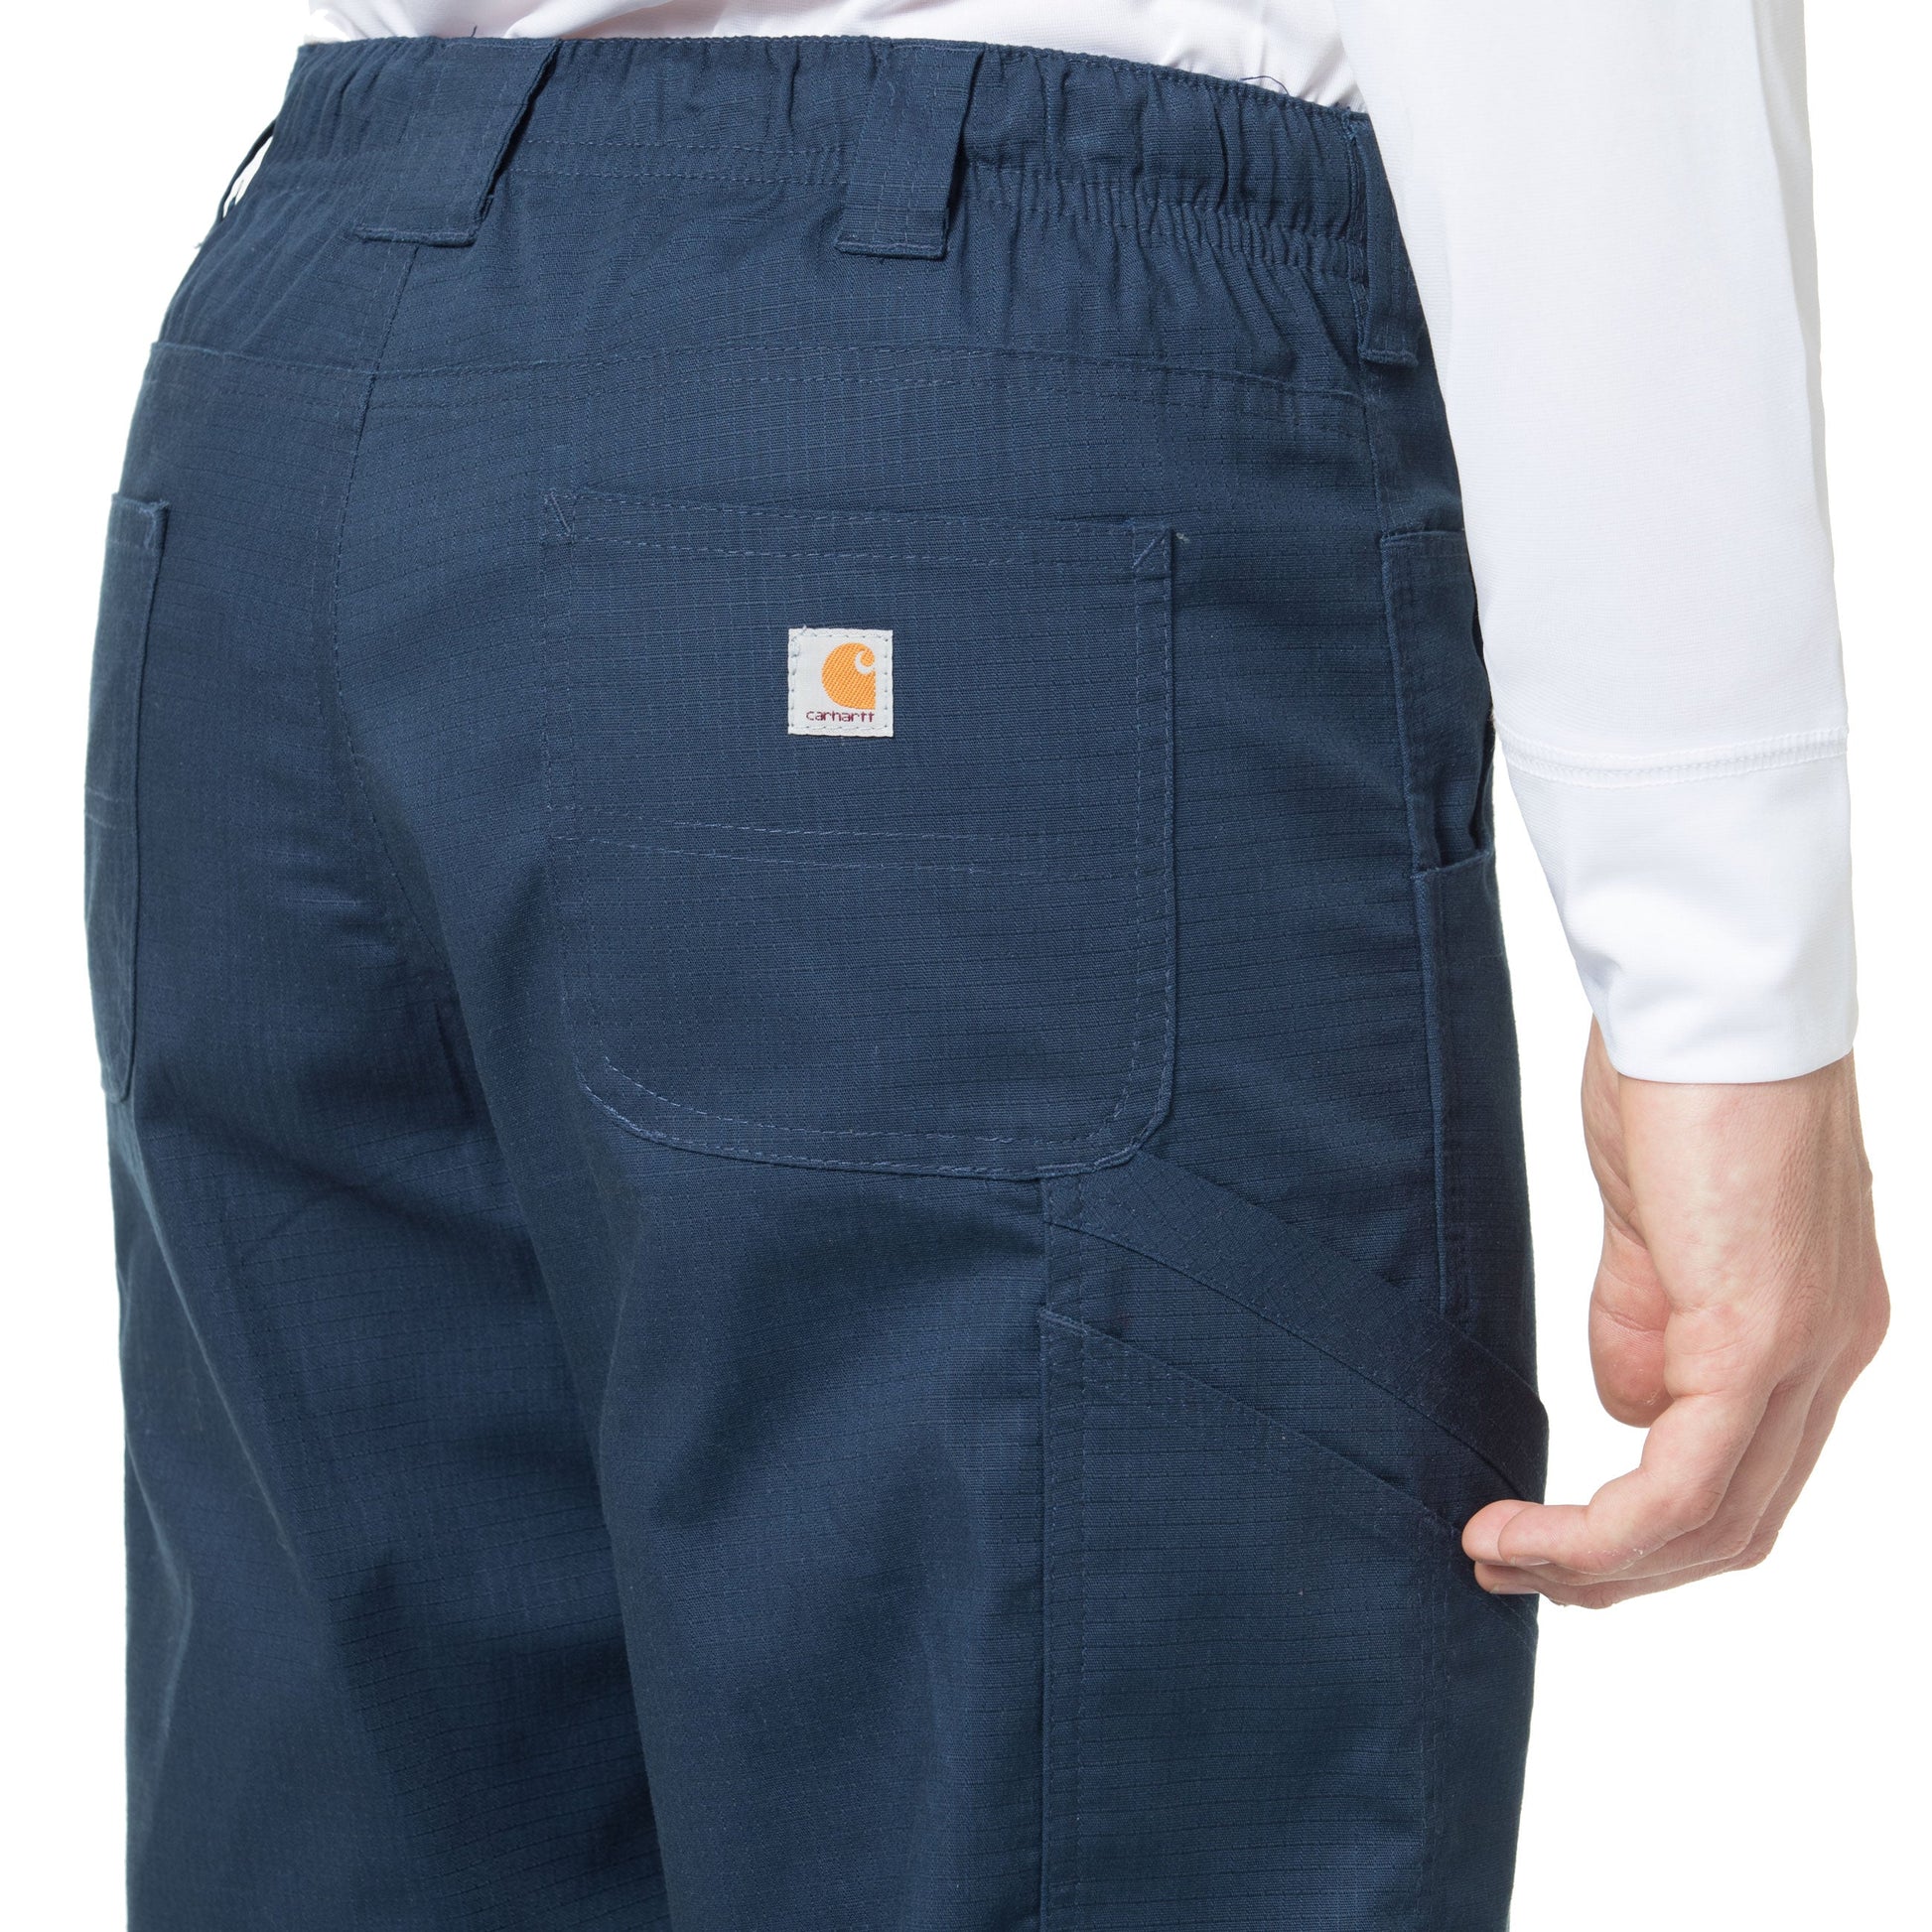 Buy Carhartt Men's Tall Base Force Mid Classic Pant by Carhartt